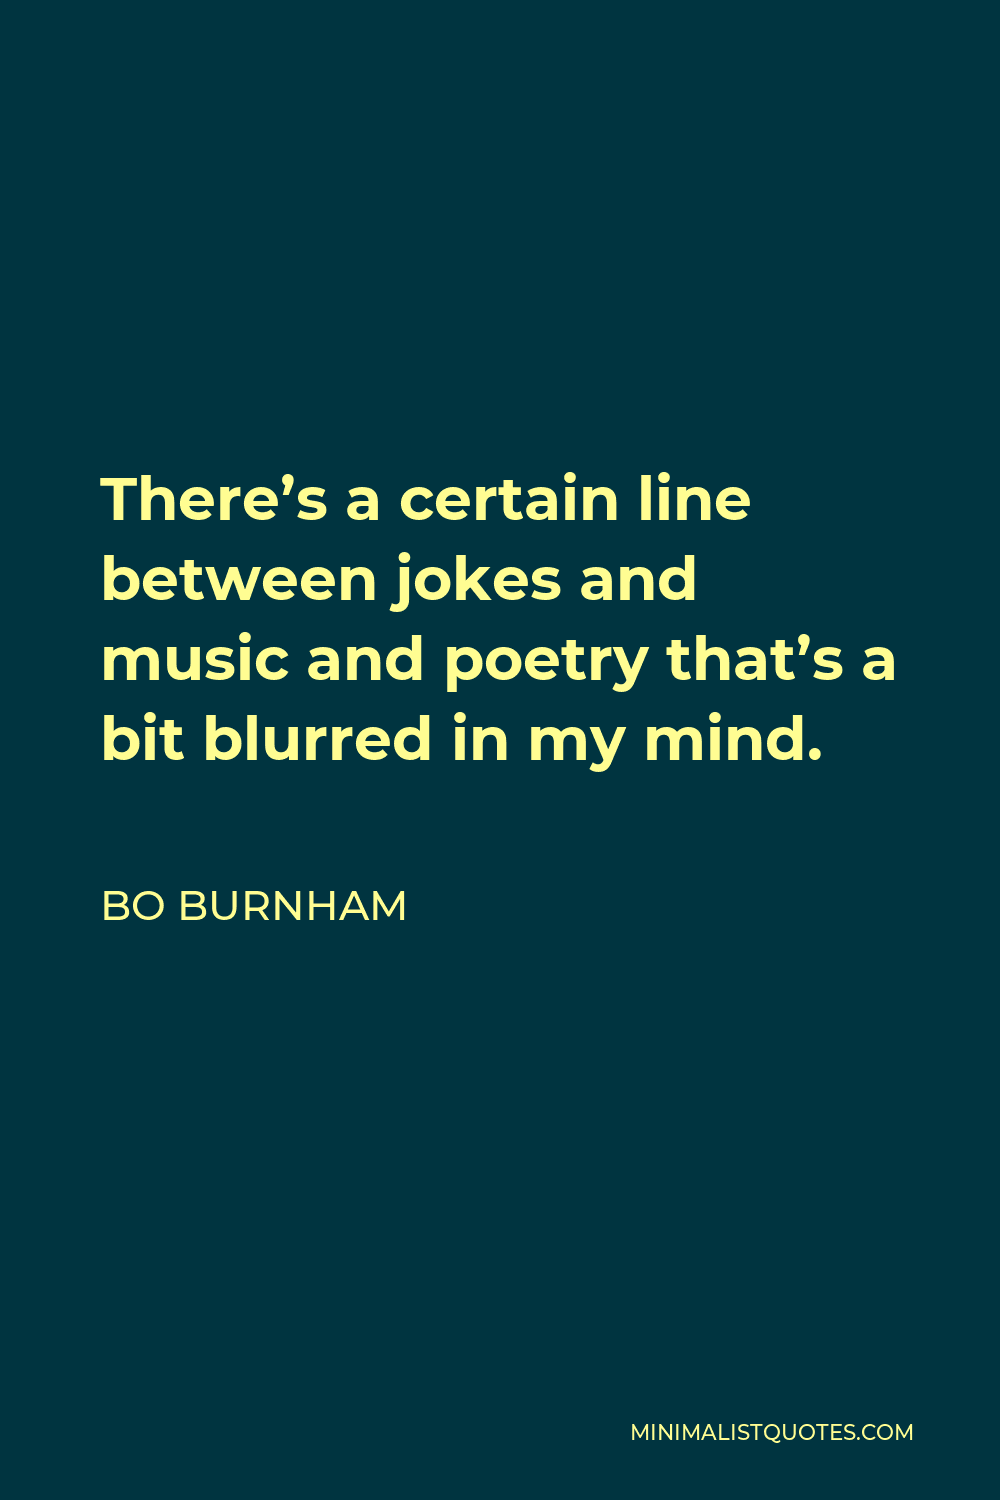 Bo Burnham Quote - There’s a certain line between jokes and music and poetry that’s a bit blurred in my mind.